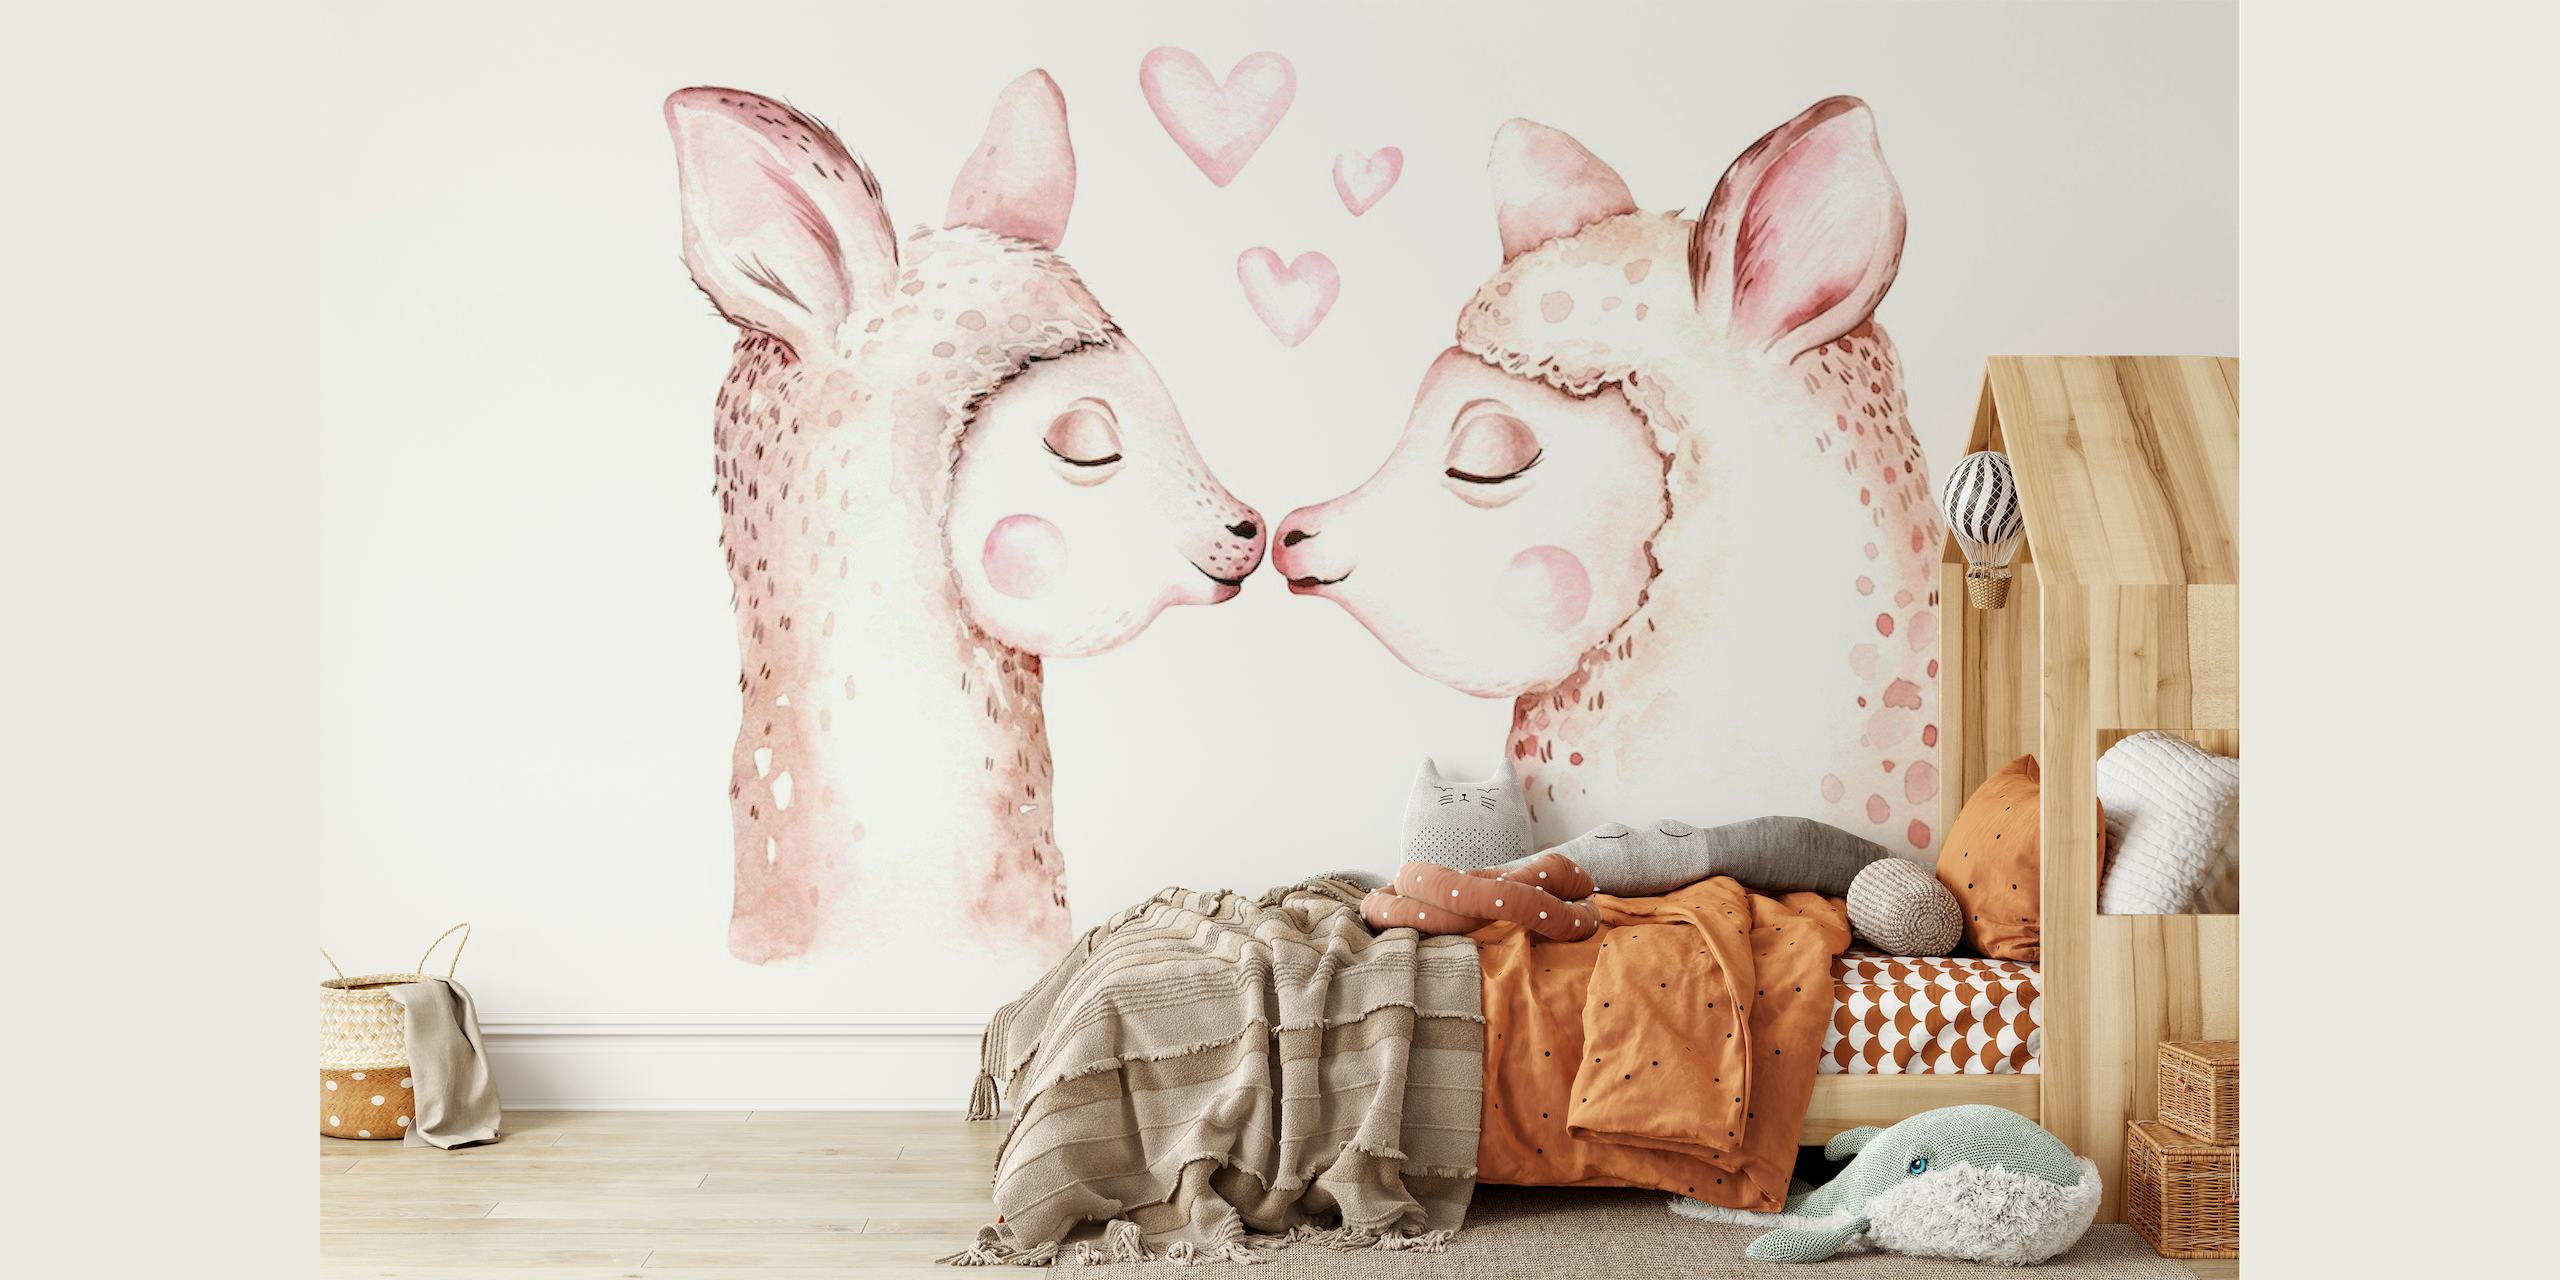 Two affectionate llamas with hearts illustration wall mural